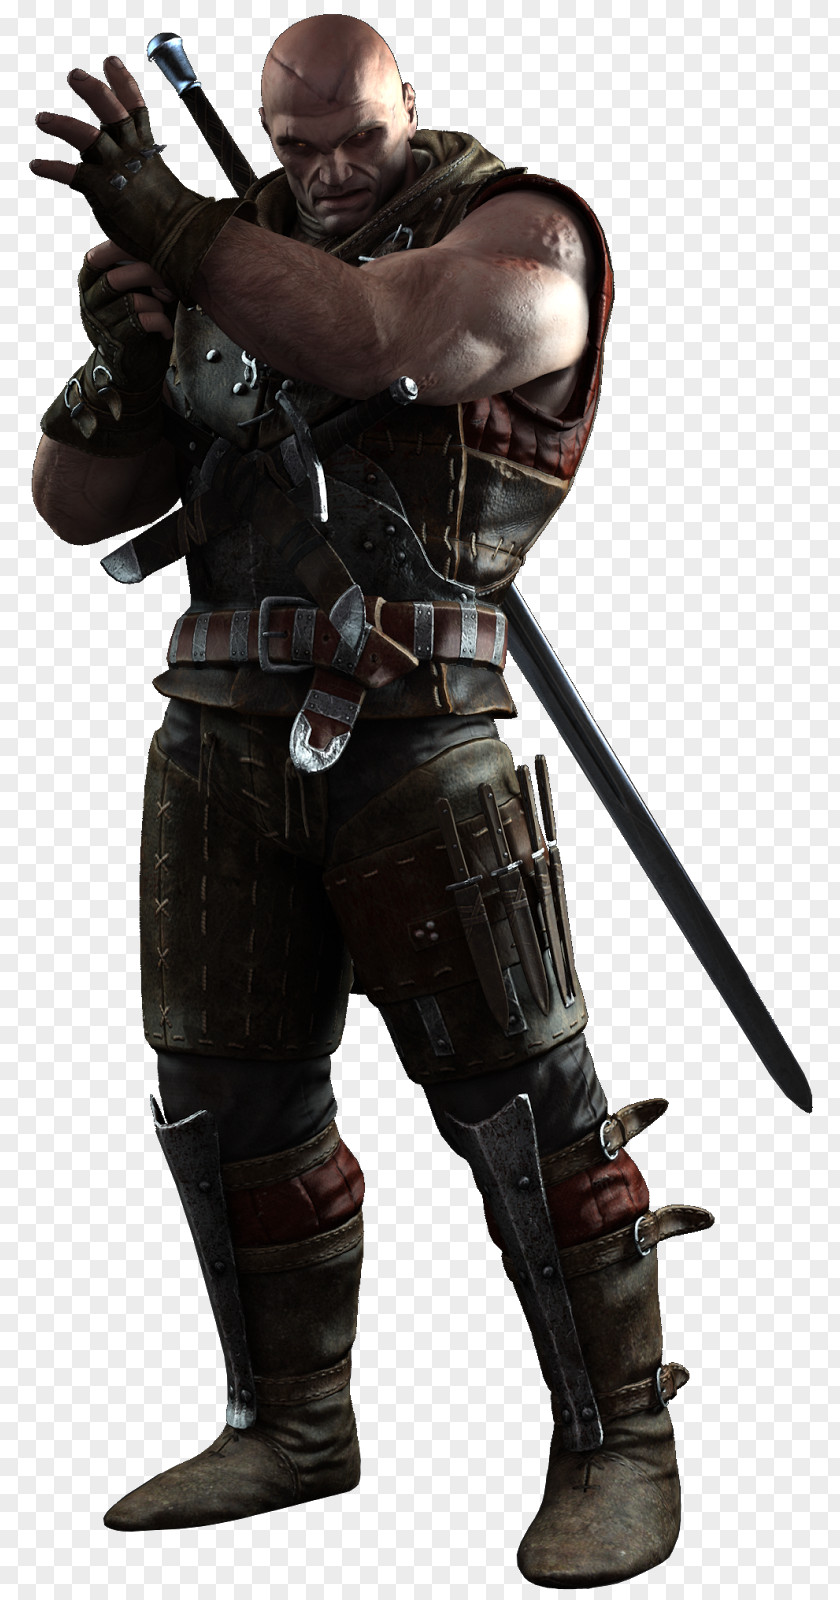 City Samurai Warrior Hero 3d The Witcher 2: Assassins Of Kings 3: Wild Hunt Letho Gulet Wiki PNG